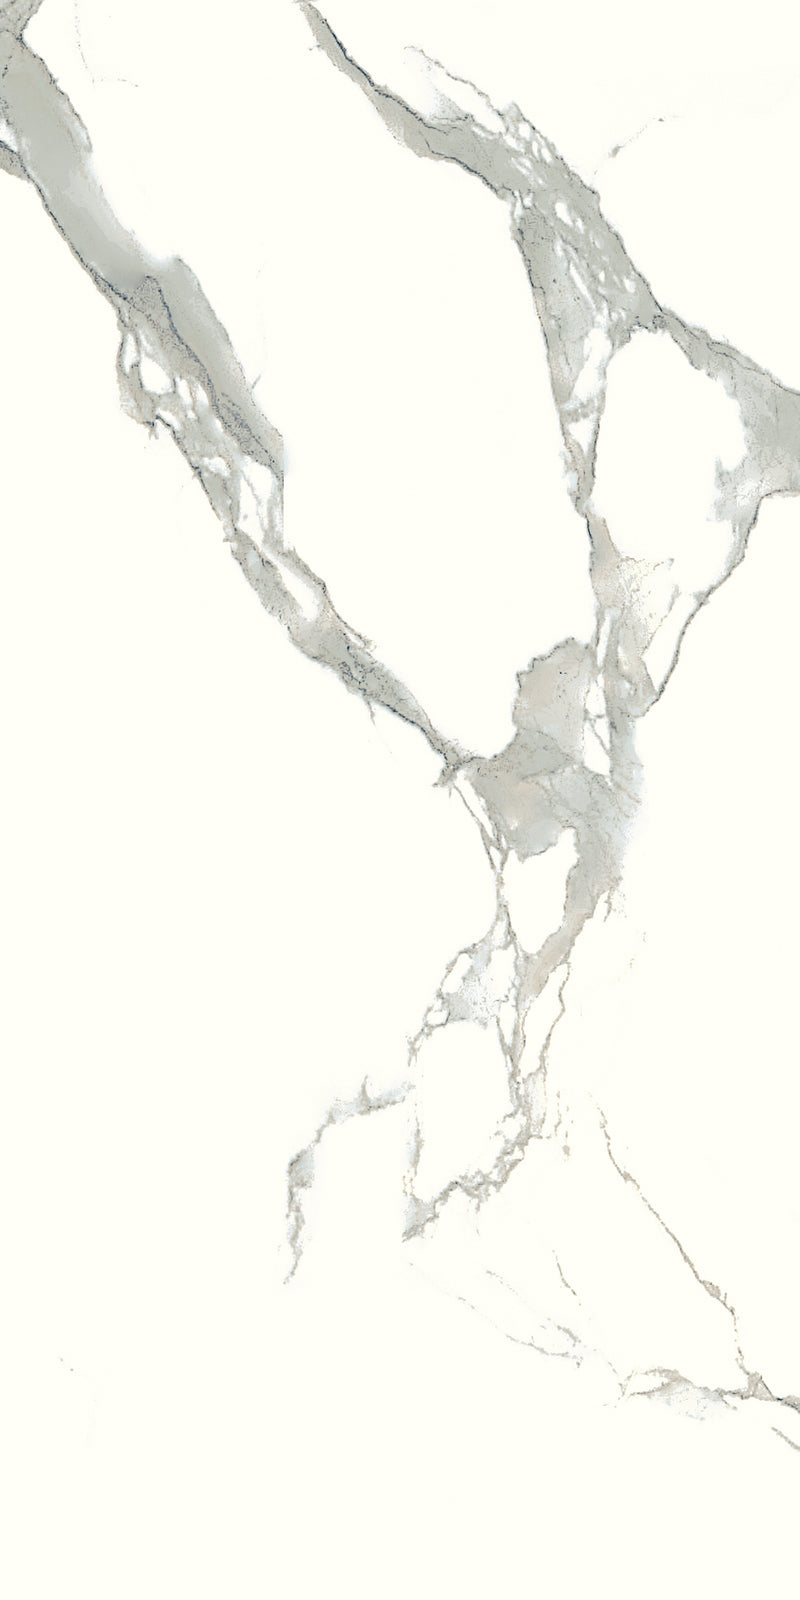 NATURAL SERIES  Calacatta White Polished/Matte Porcelain Tile 12"x24",24"x24" Wall & Floor